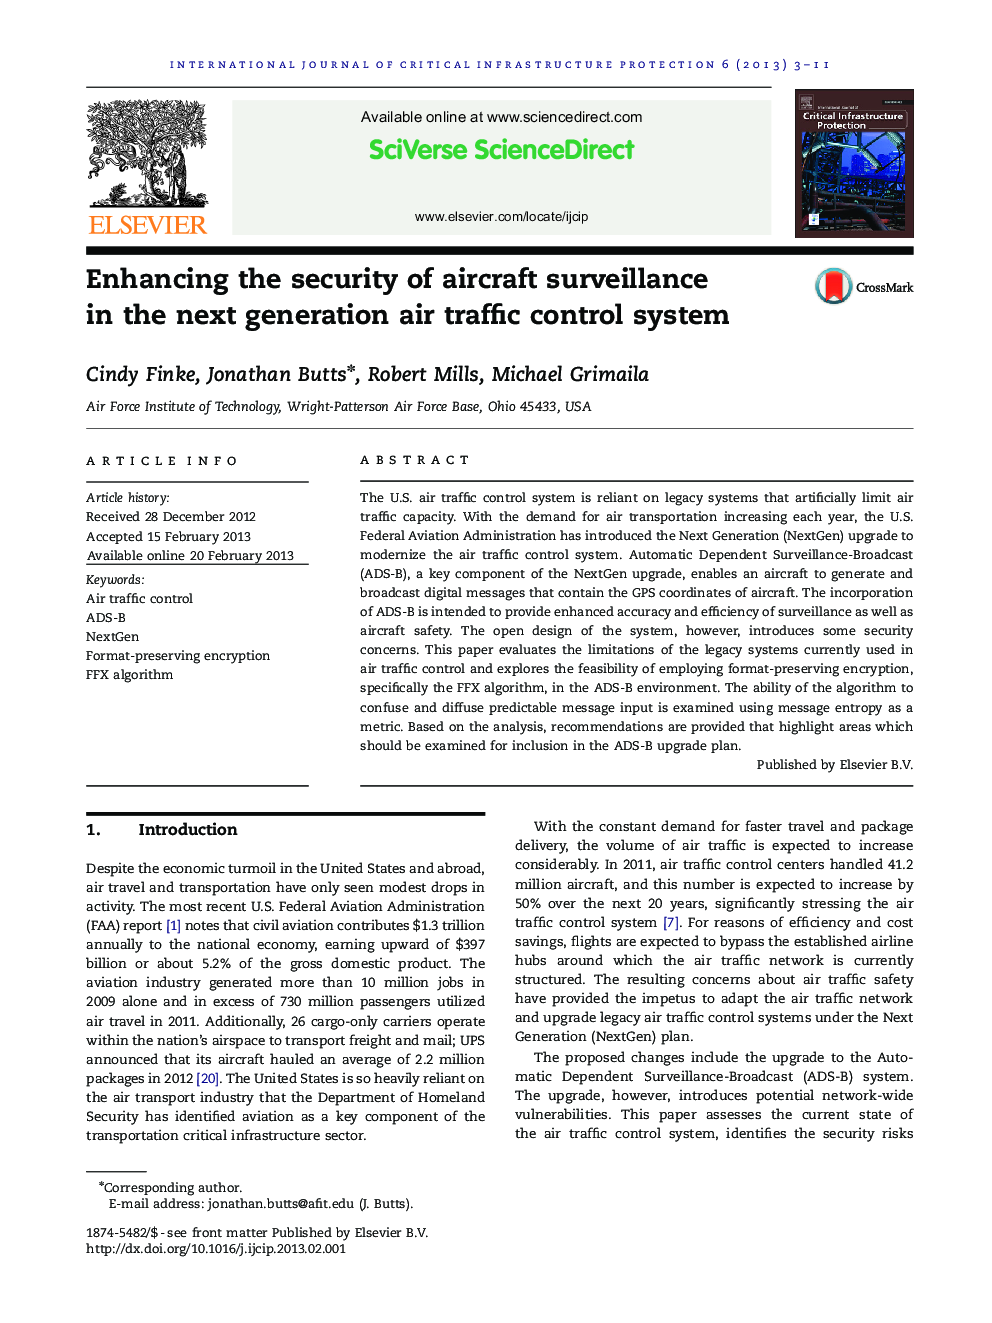 Enhancing the security of aircraft surveillance in the next generation air traffic control system